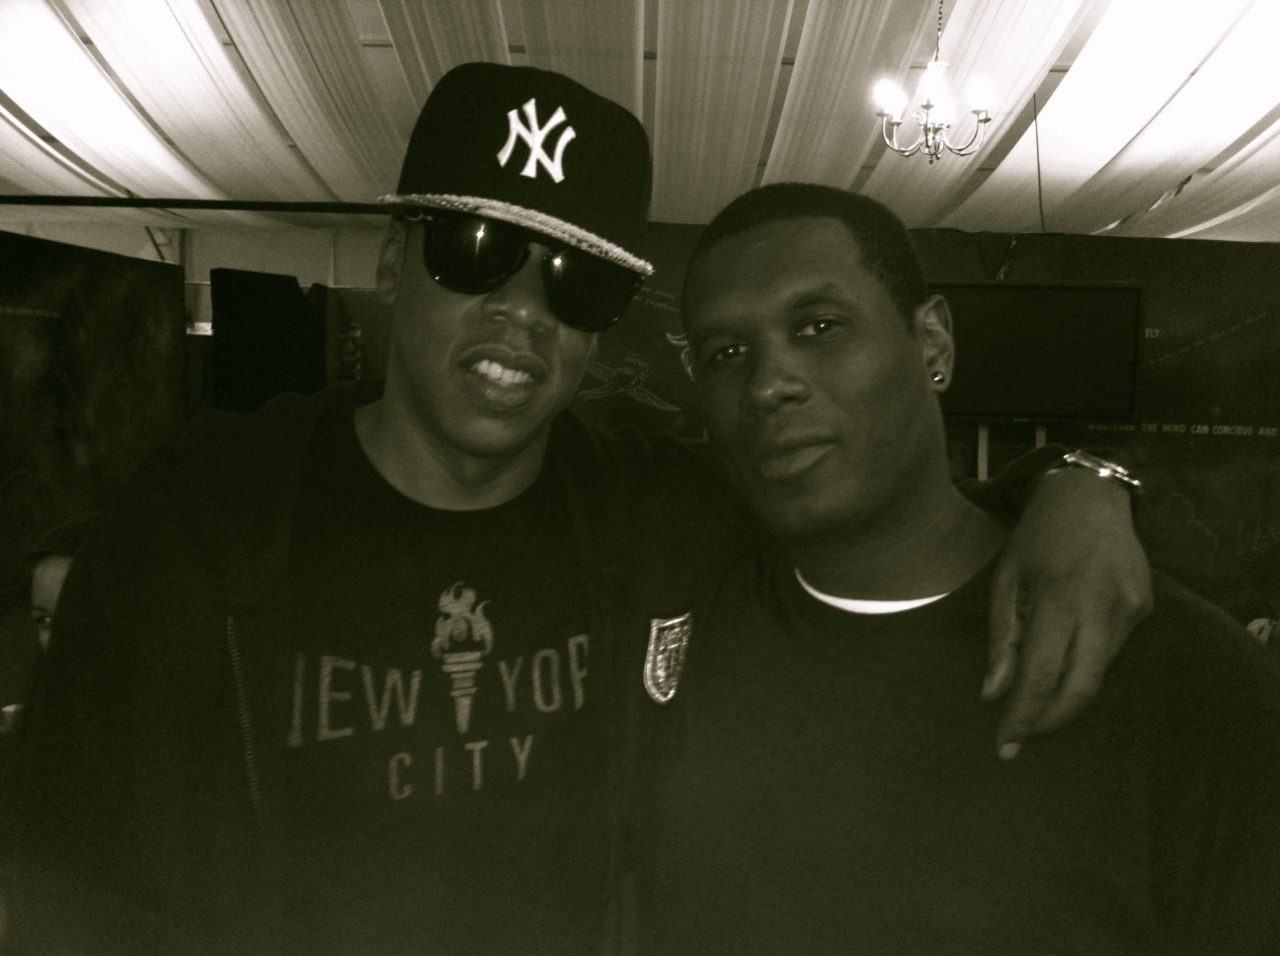 jay-z-and-jay-electronica-we-made-it-remix